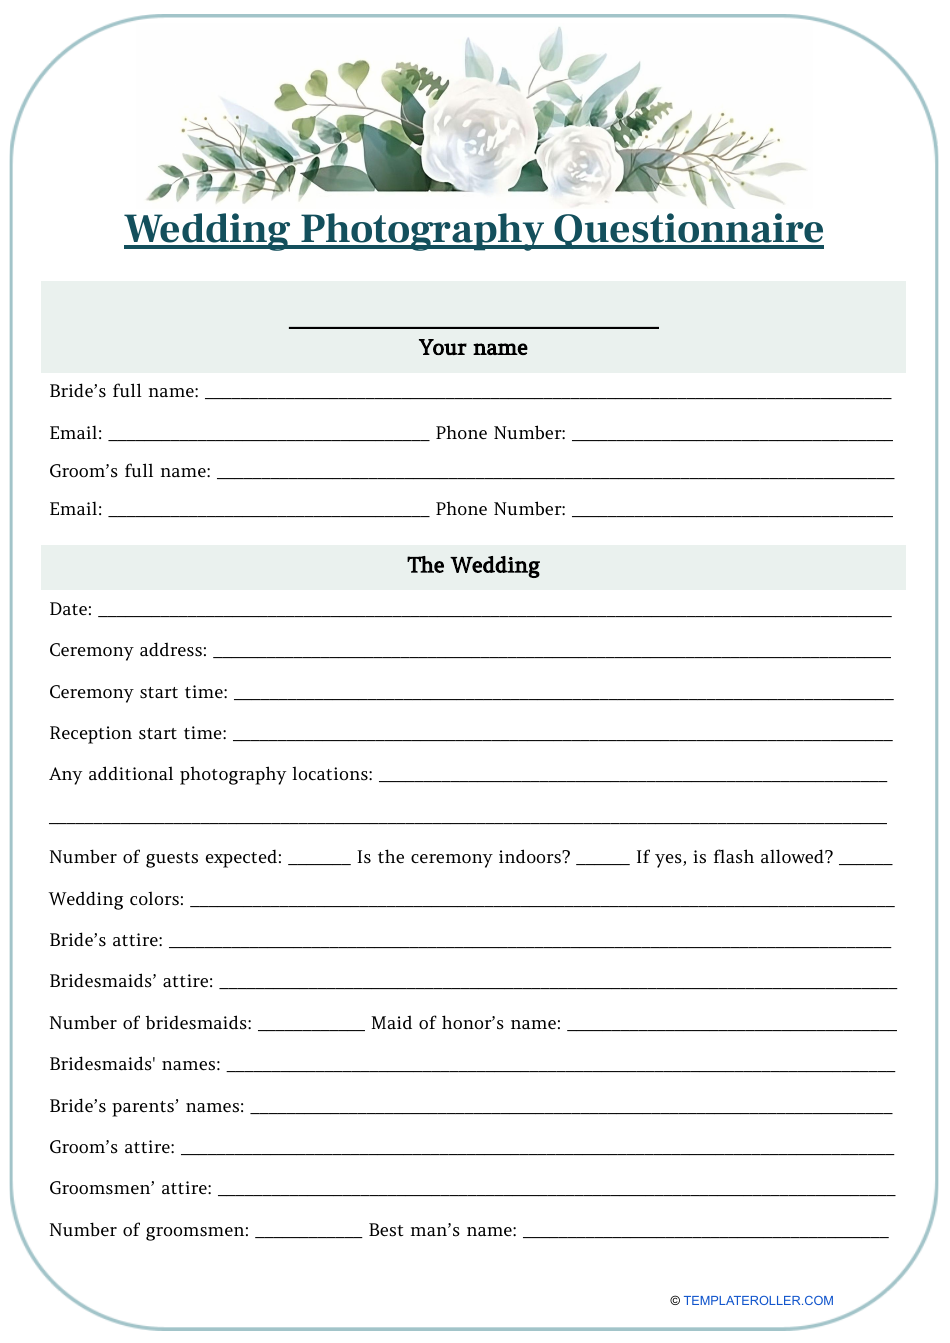 Wedding Photography Questionnaire Template Download Printable PDF ...